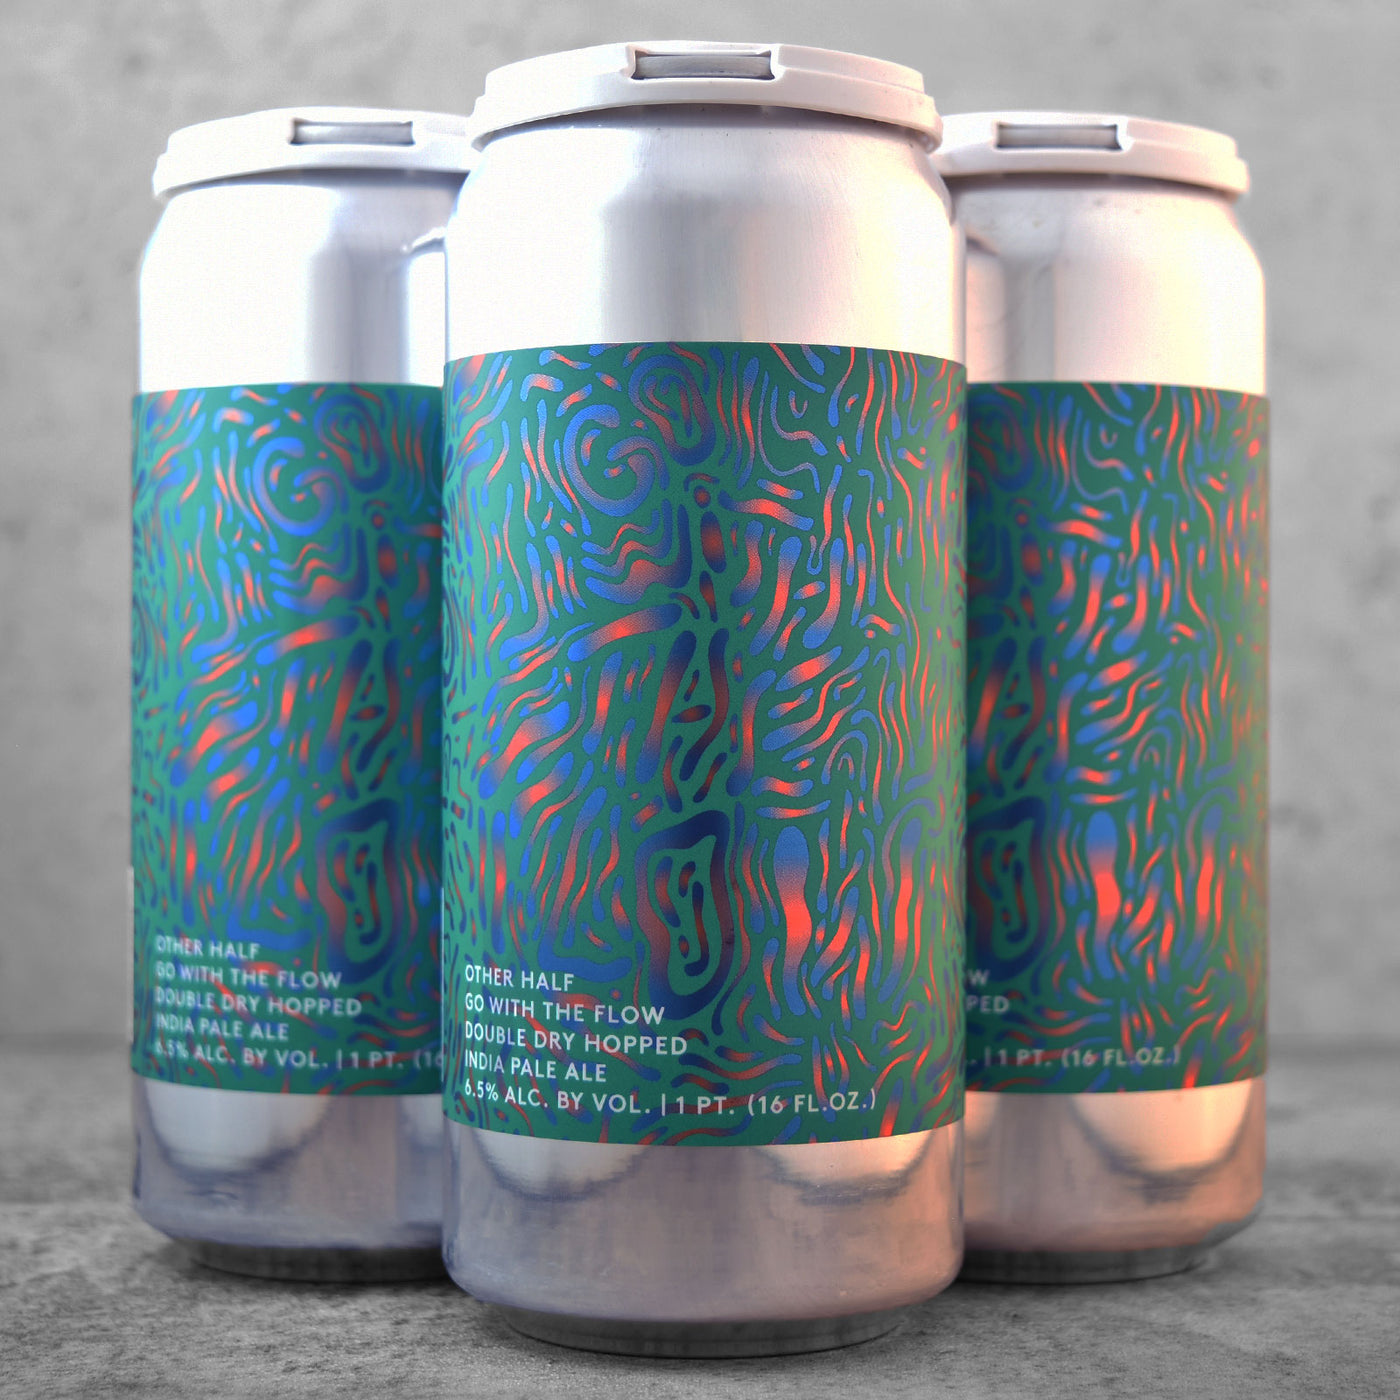 Other Half DDH Go With The Flow